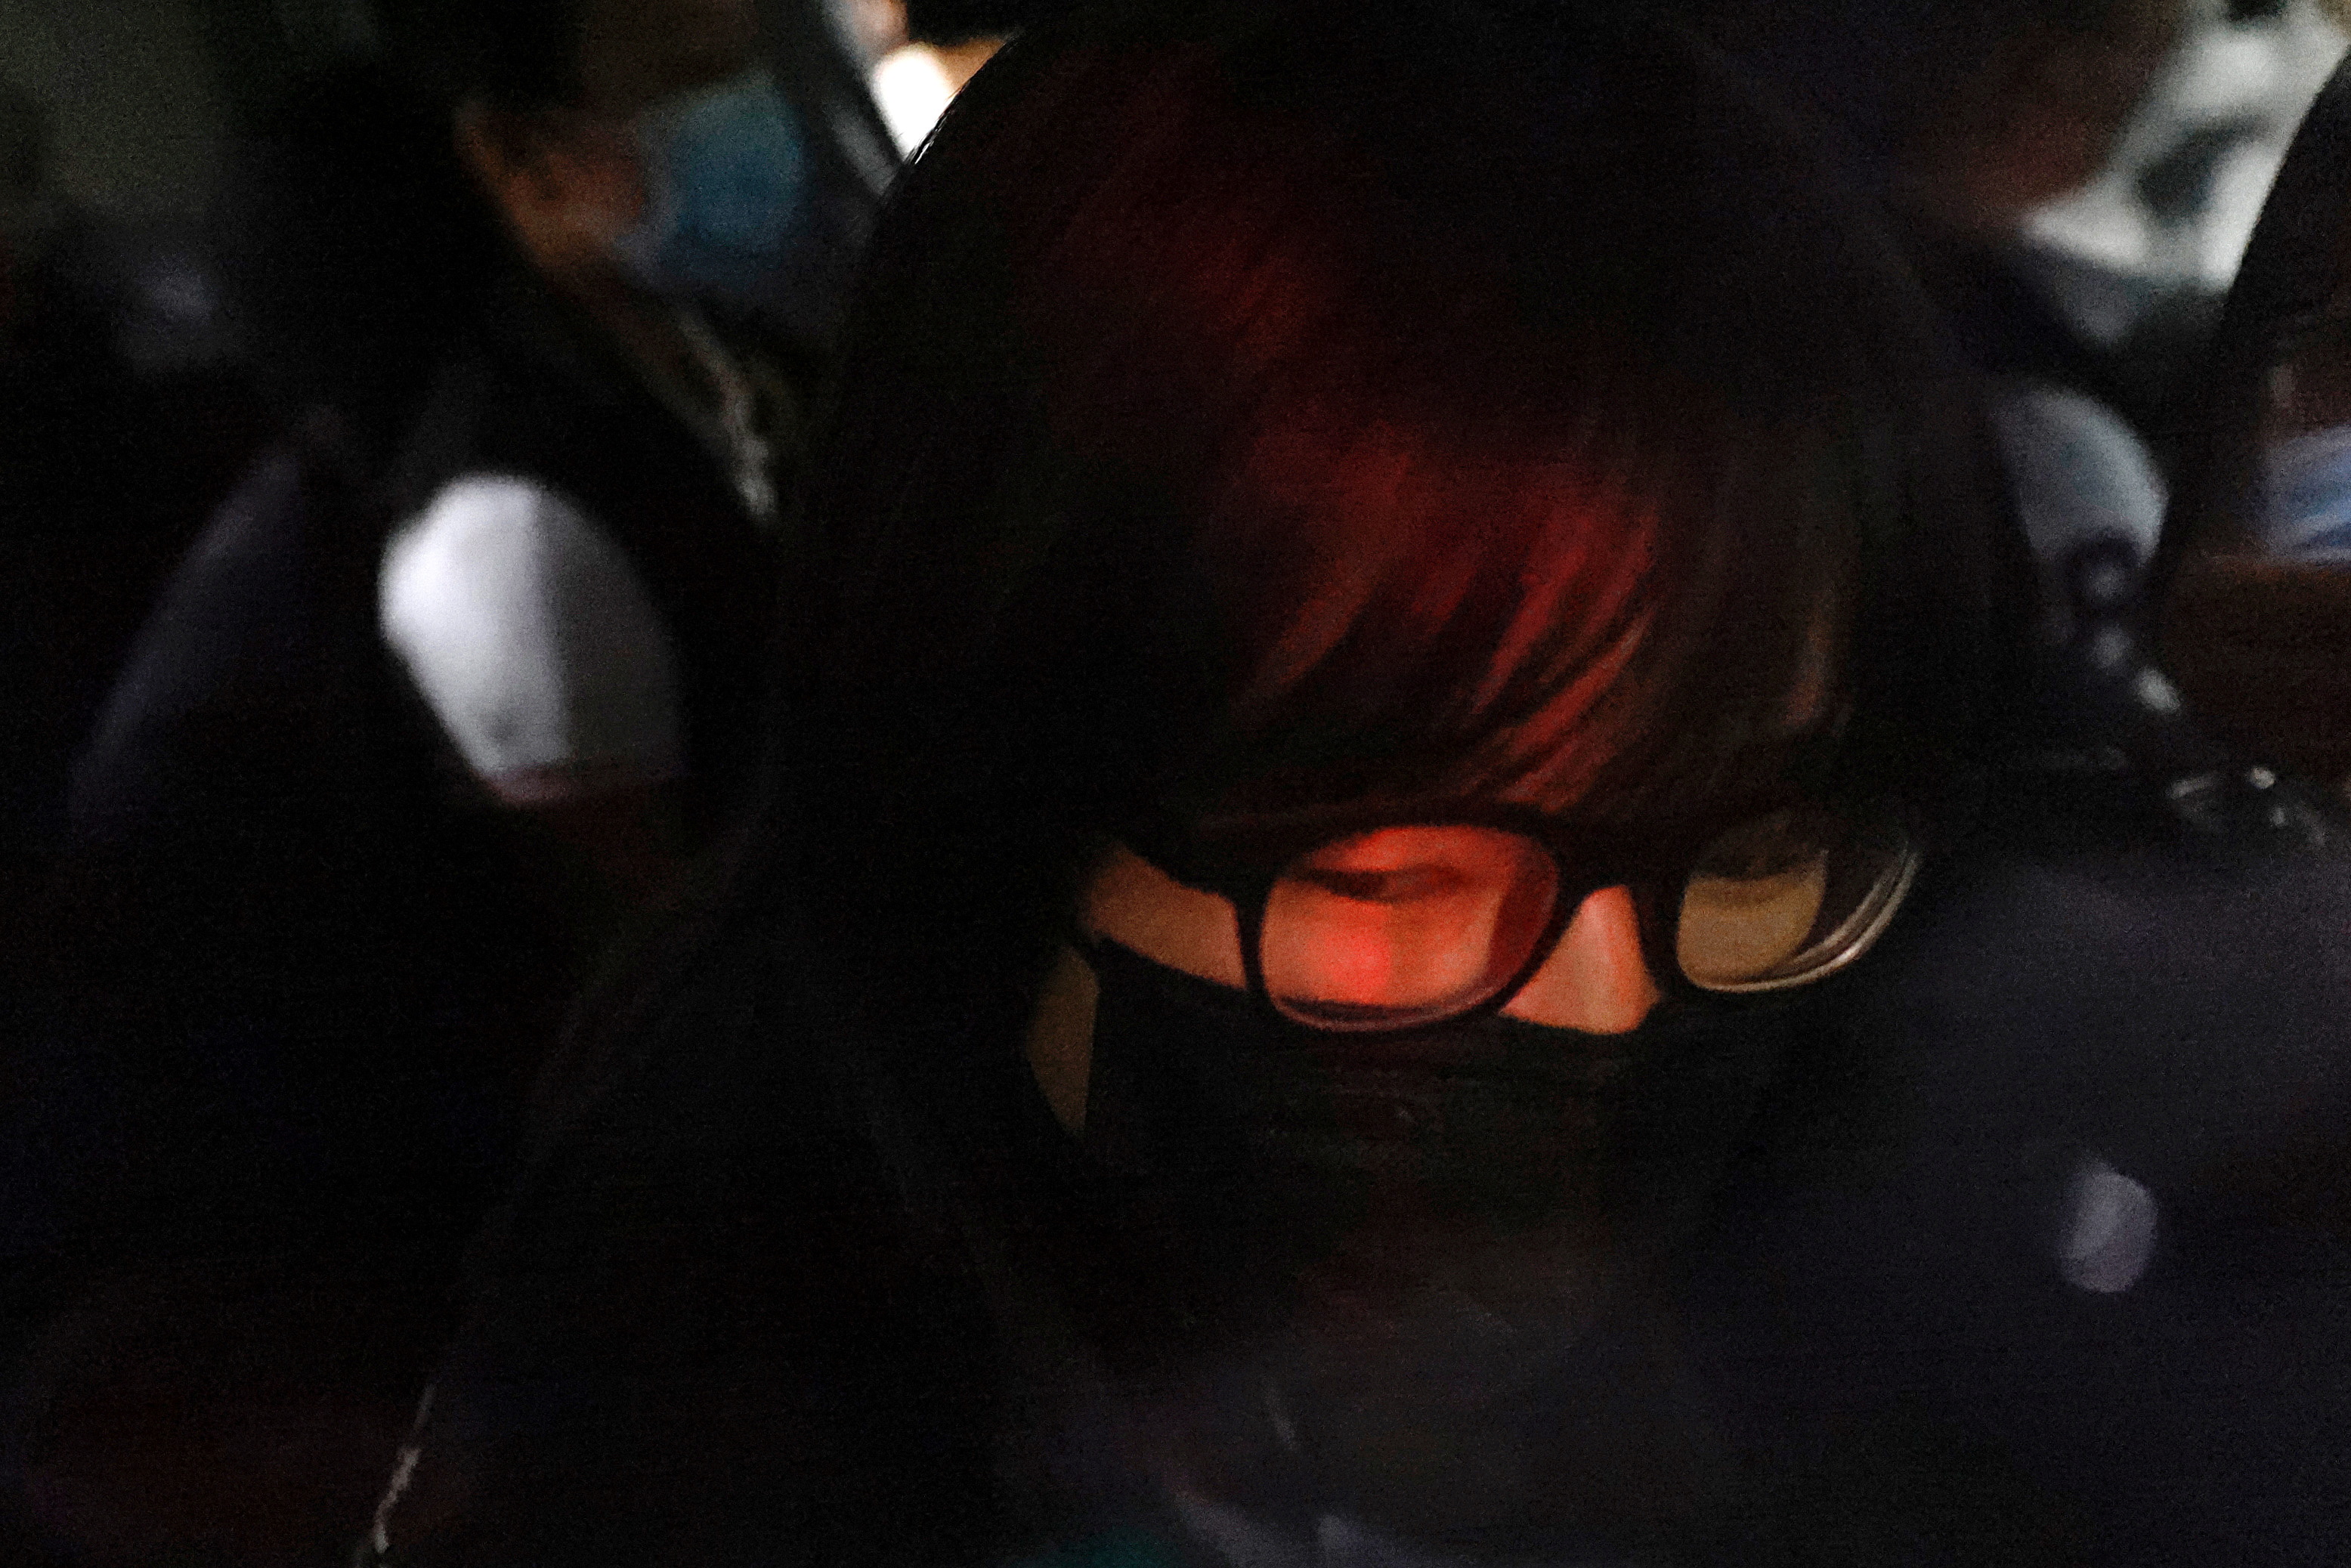 Hong Kong Alliance in Support of Patriotic Democratic Movements of China Vice-Chairwoman Tonyee Chow Hang-tung is seen inside a vehicle after being detained in Hong Kong, China, September 8, 2021. REUTERS/Tyrone Siu